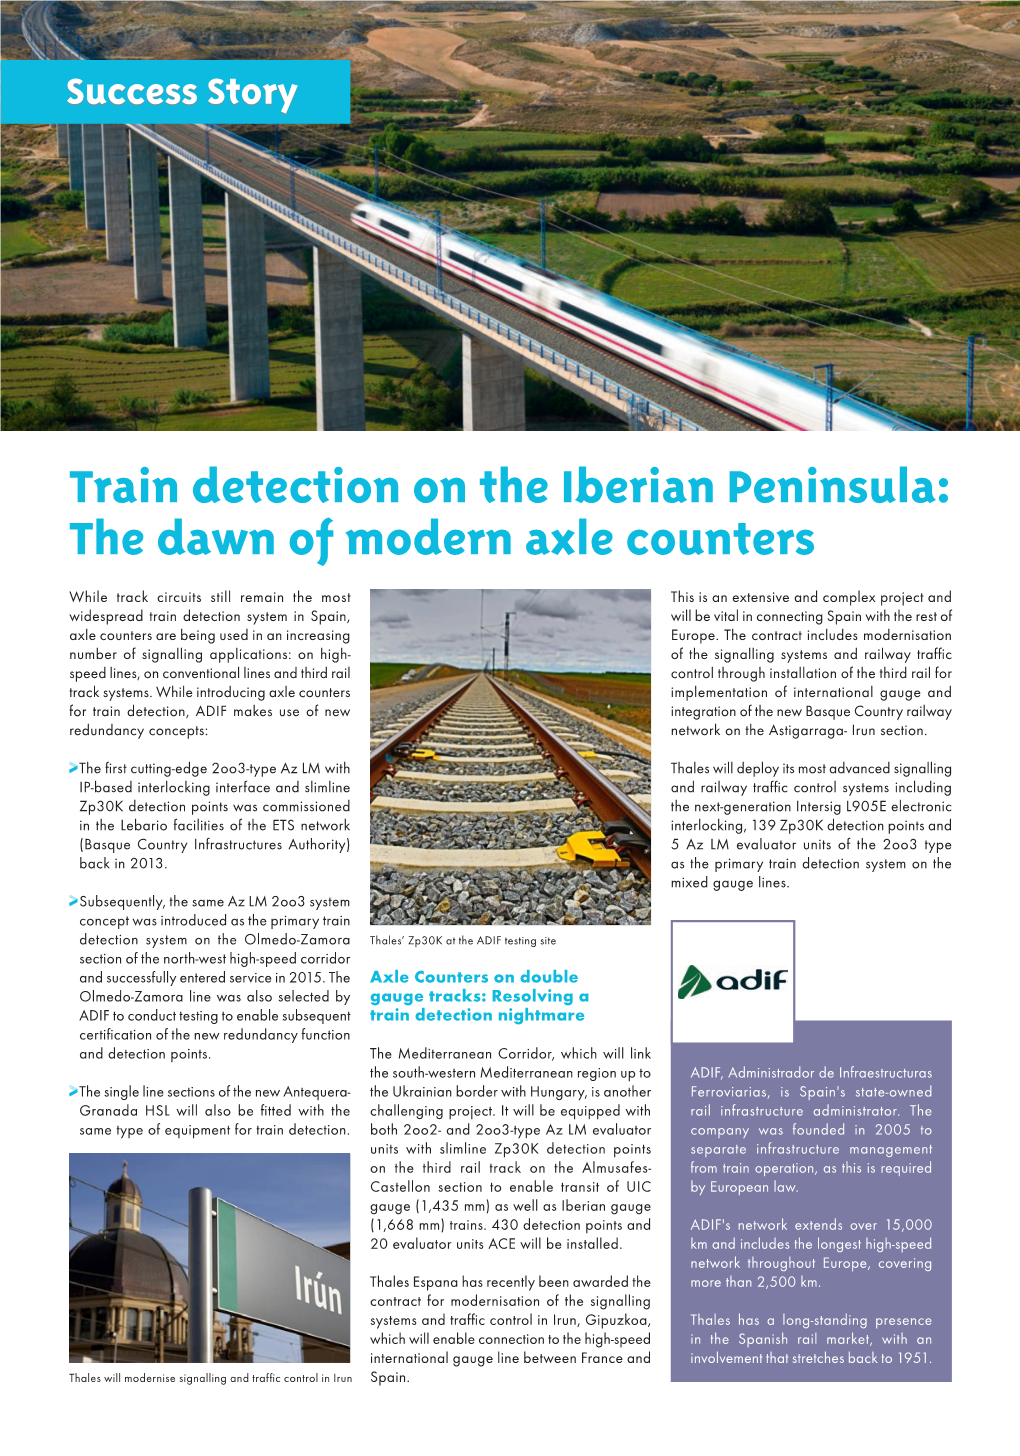 Train Detection on the Iberian Peninsula: the Dawn of Modern Axle Counters